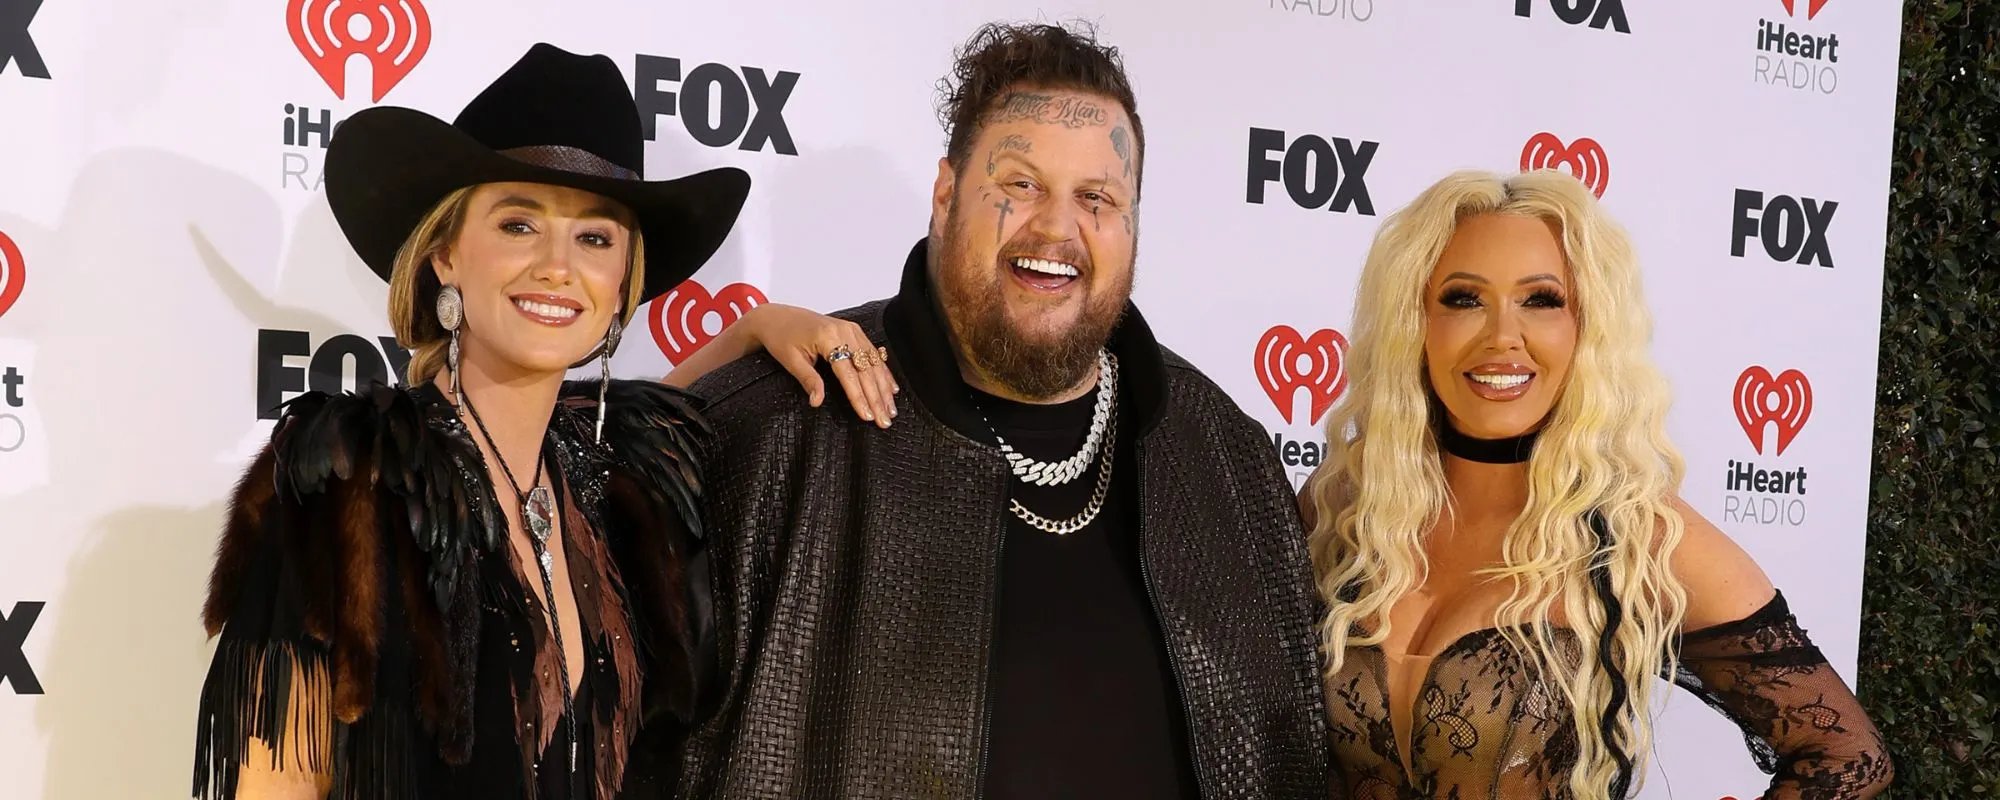 Lainey Wilson Shouts Out Bunnie Xo After Masterful Jelly Roll Duet at iHeartRadio Music Awards